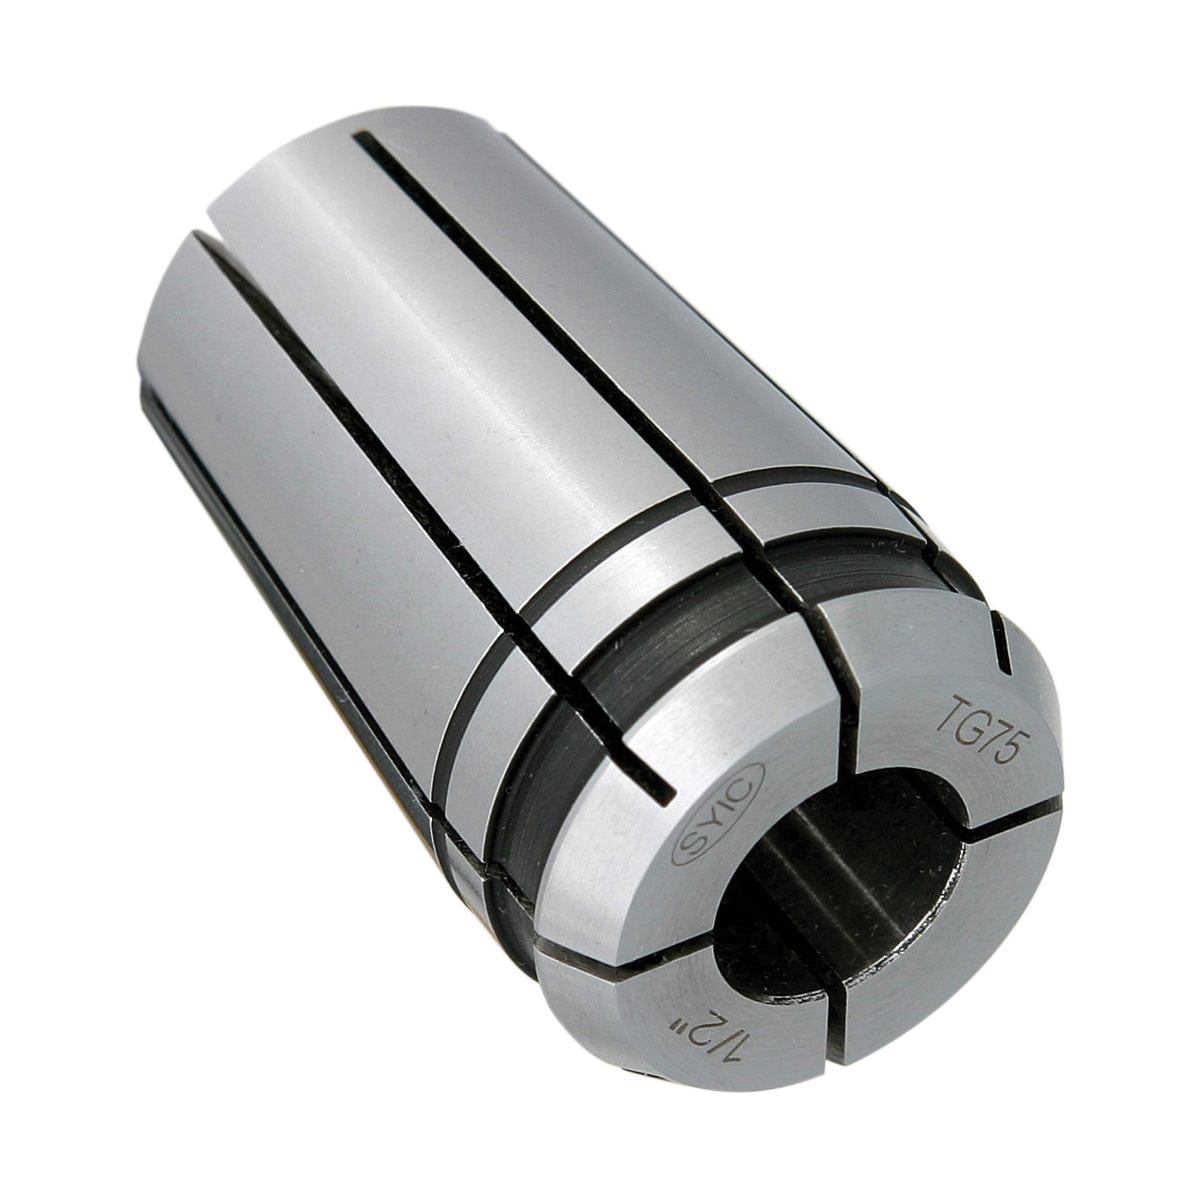 TG75 39/64" COLLET